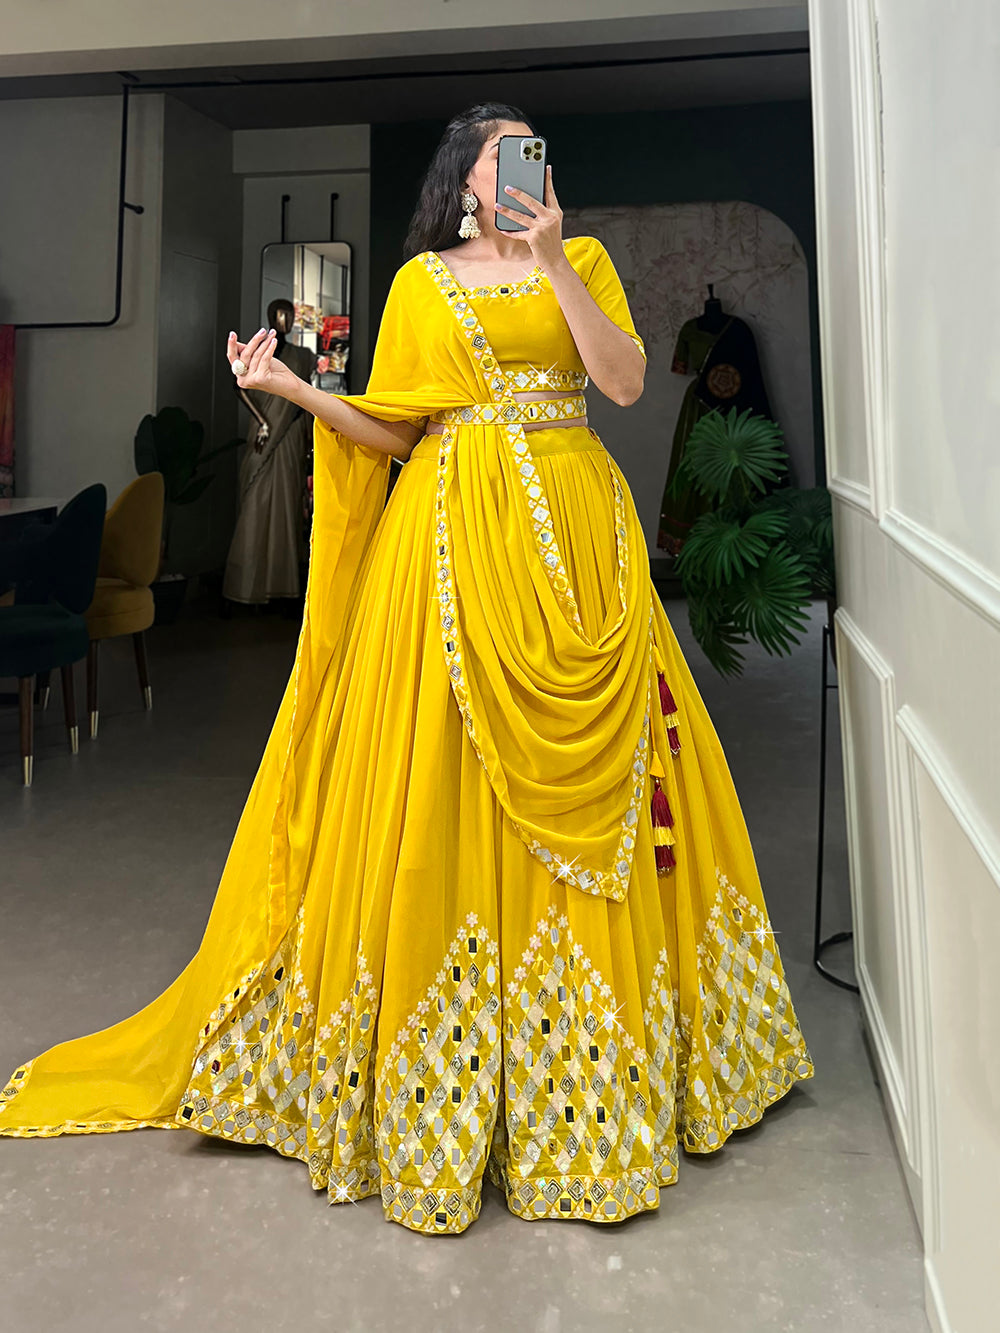 Sunset Yellow Lehenga Choli With Floral And Leaf Cut Mirror Work | Indian  wedding dress designers, Indian fashion dresses, Dress indian style